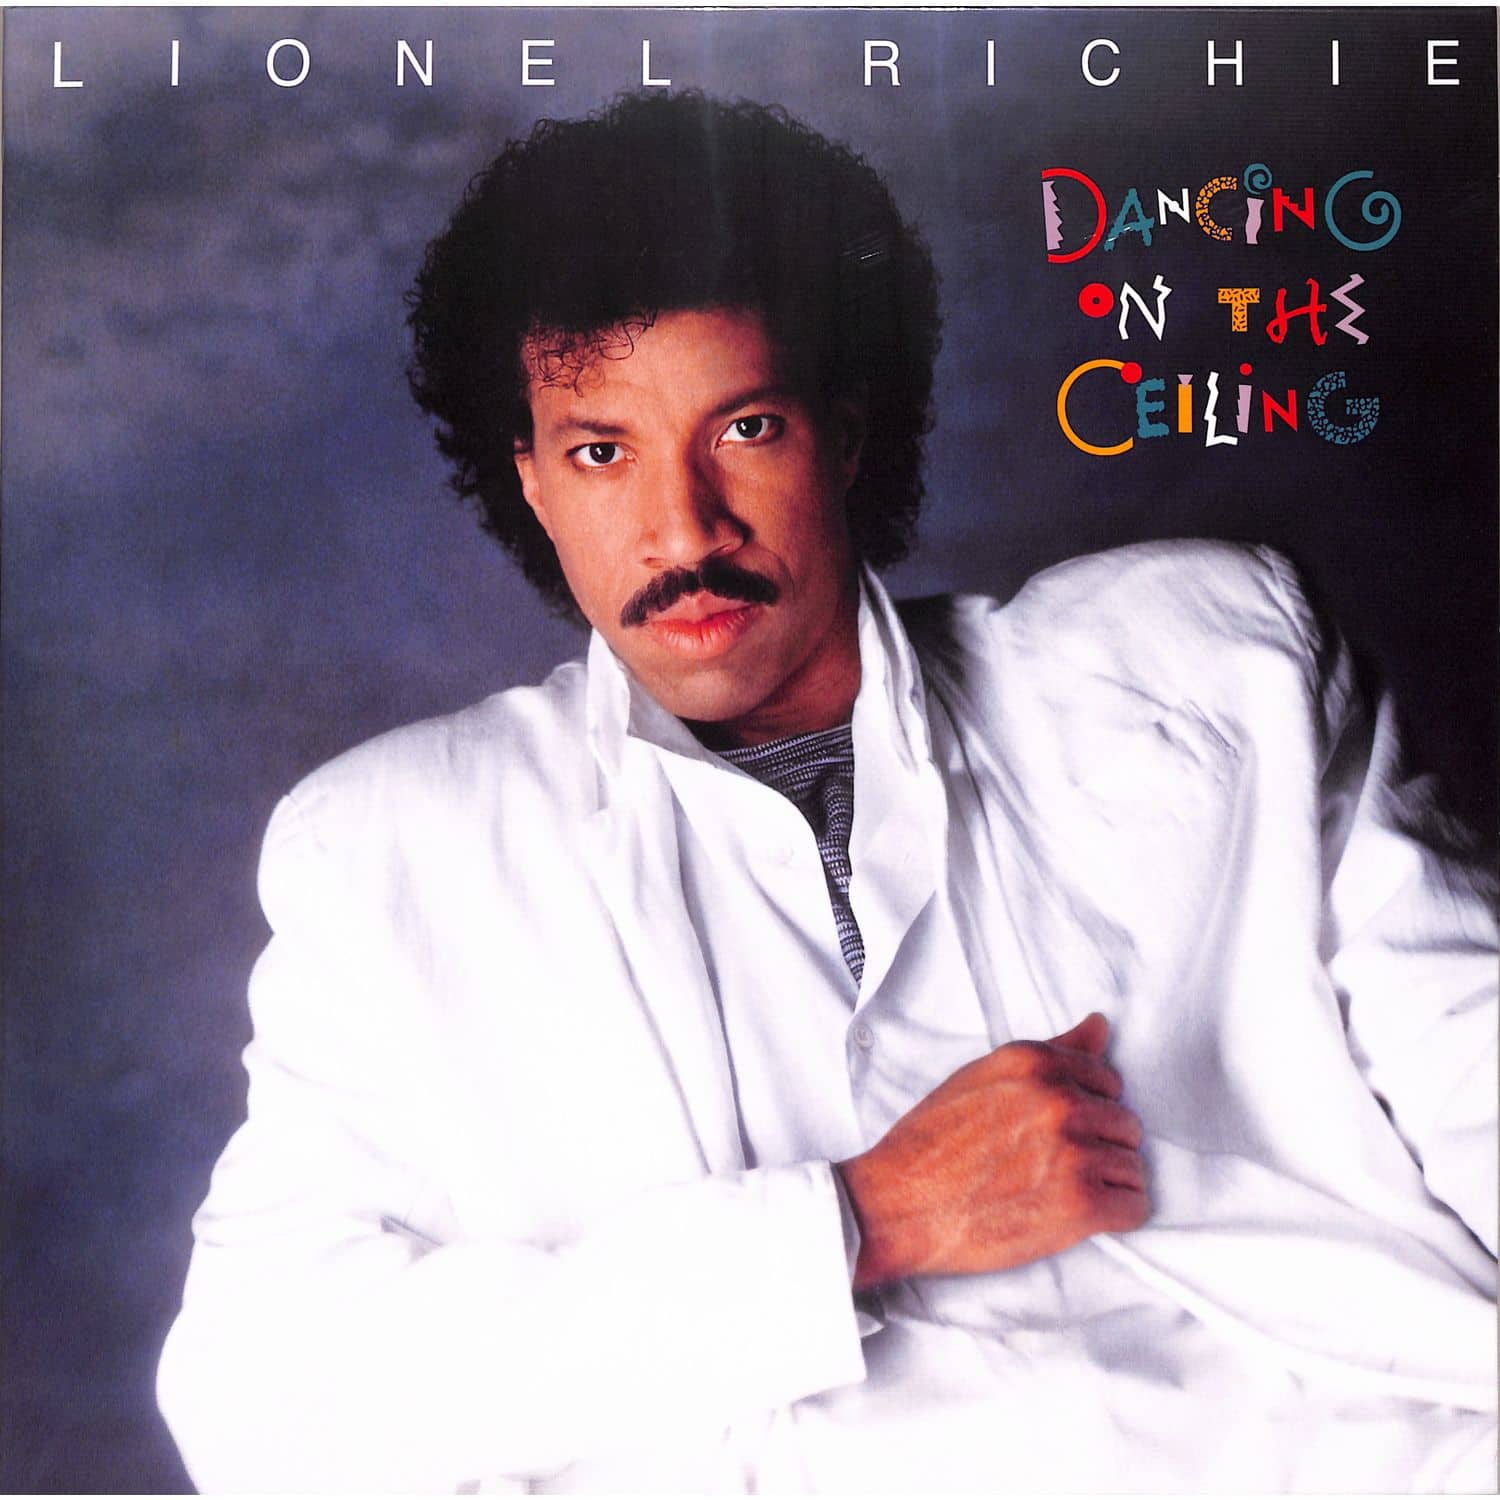 Lionel Richie - DANCING ON THE CEILING 